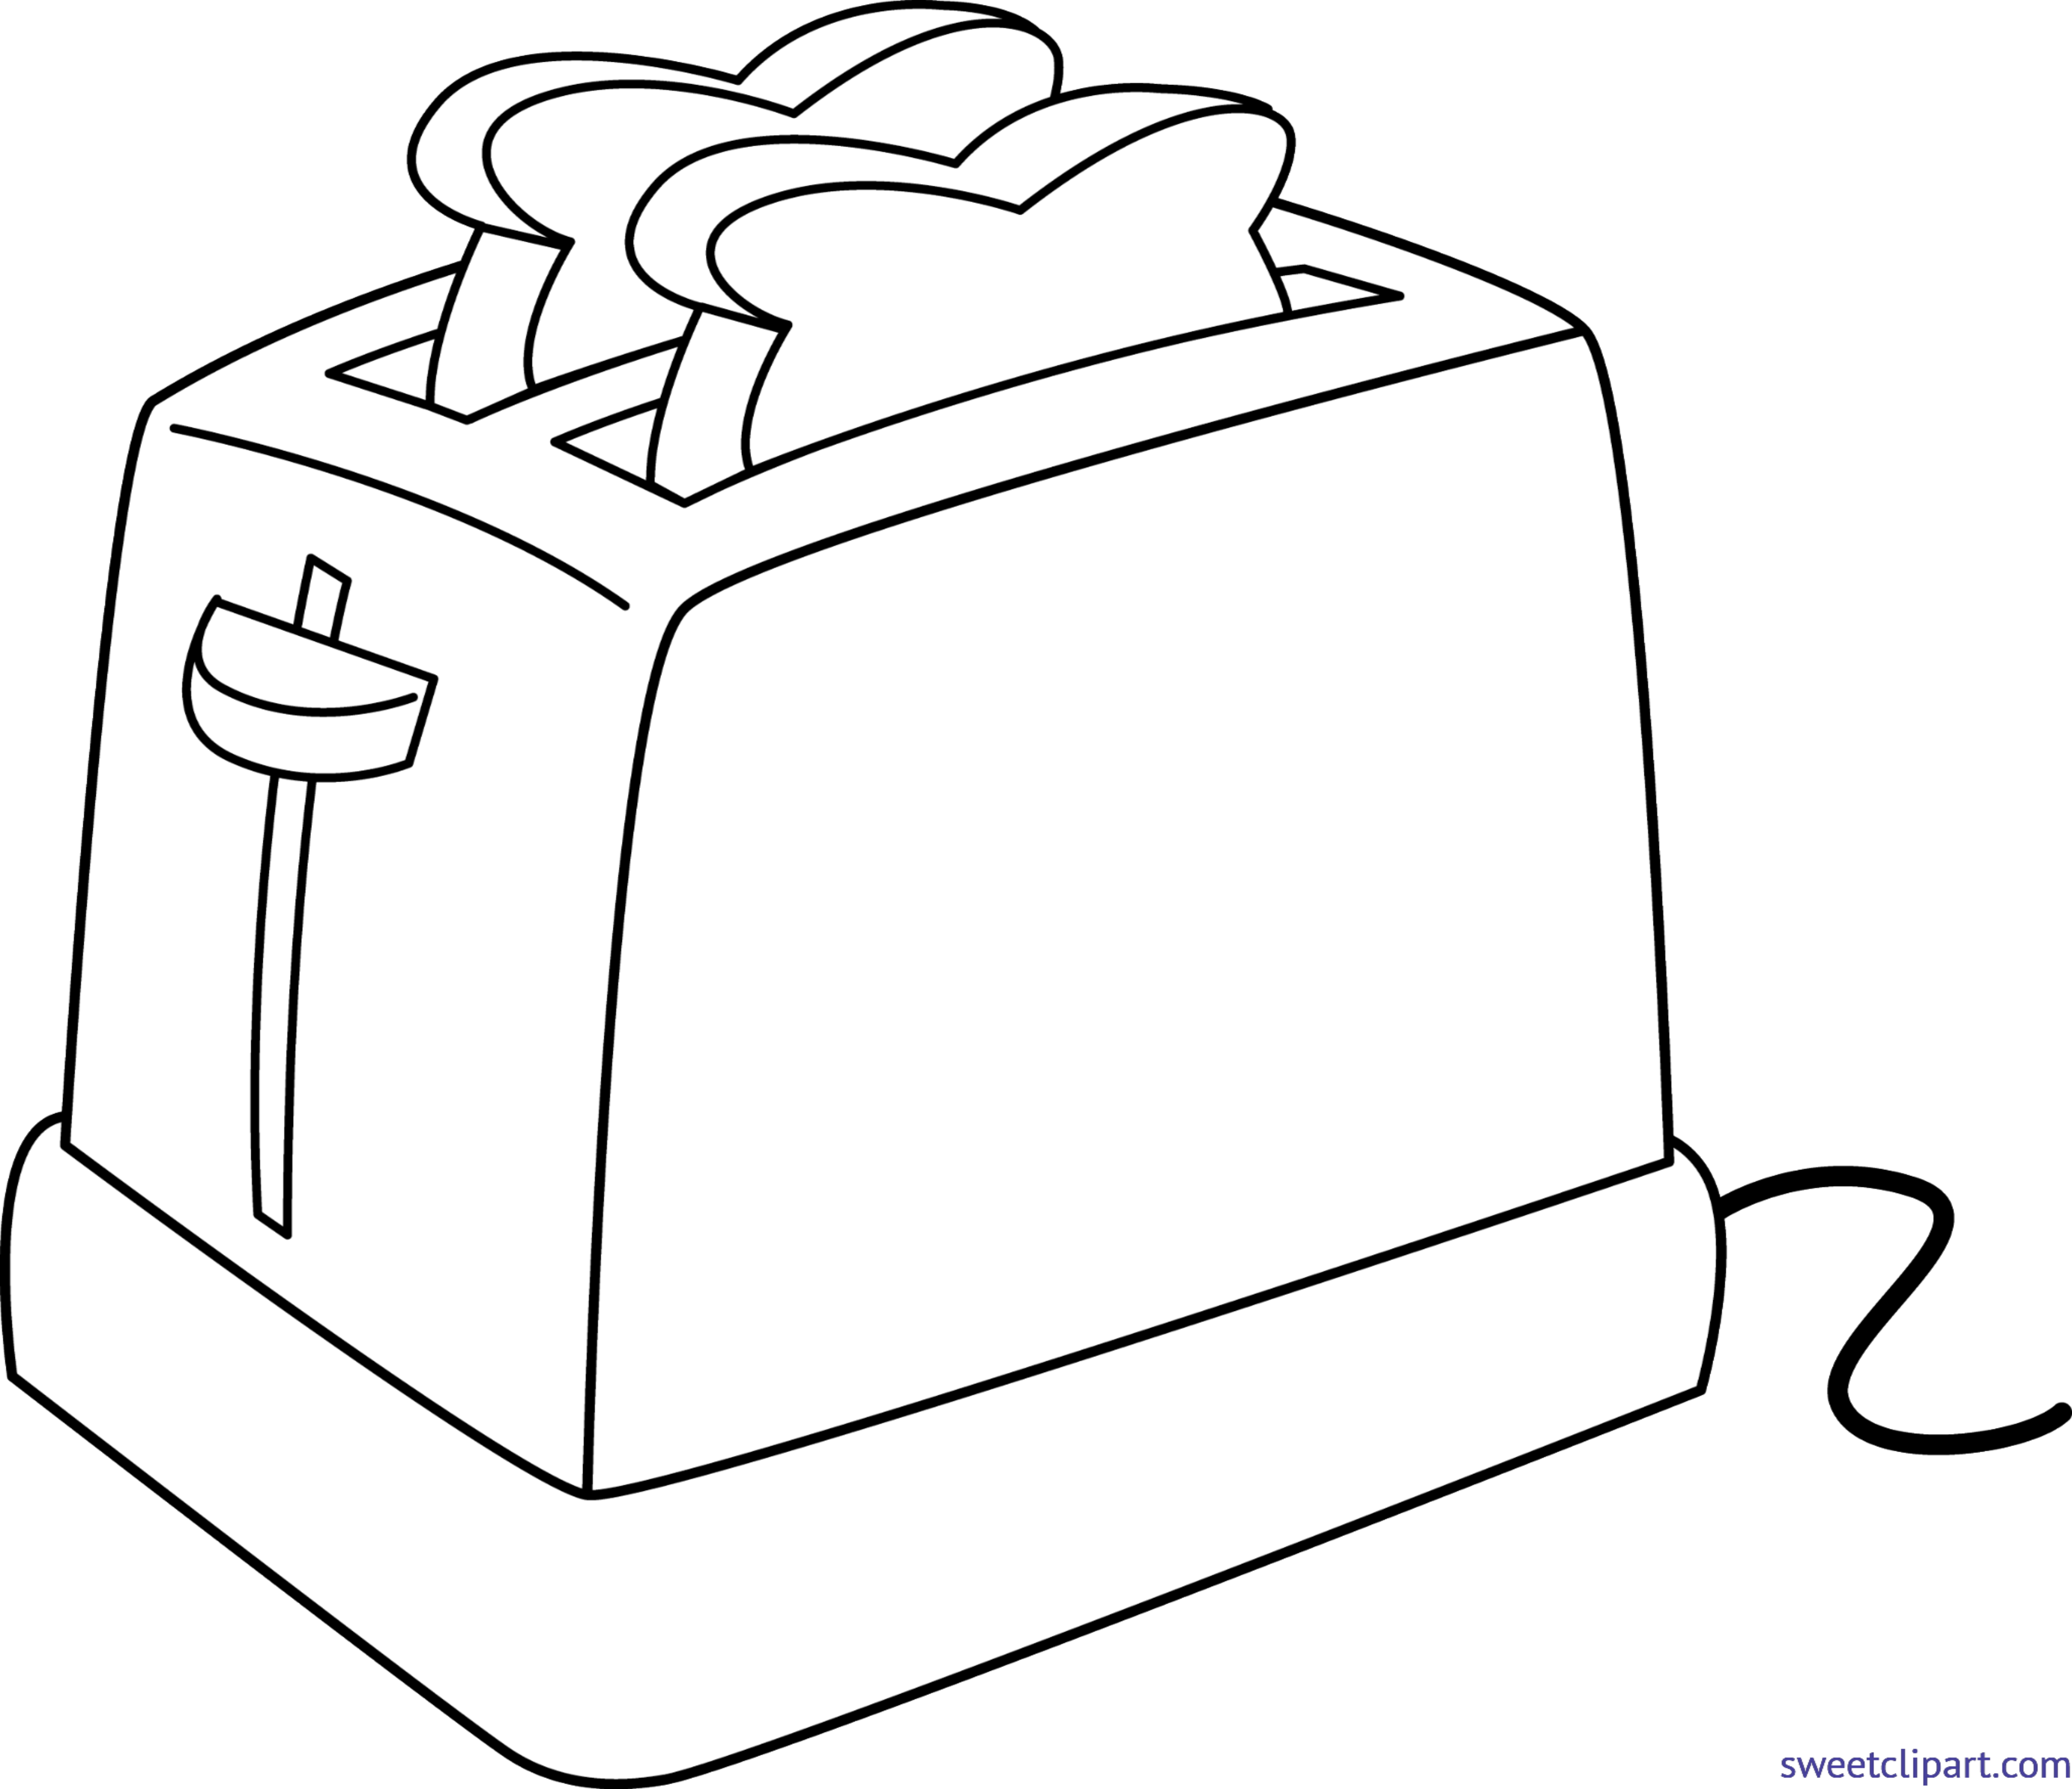 Toaster Lineart Clip Art.